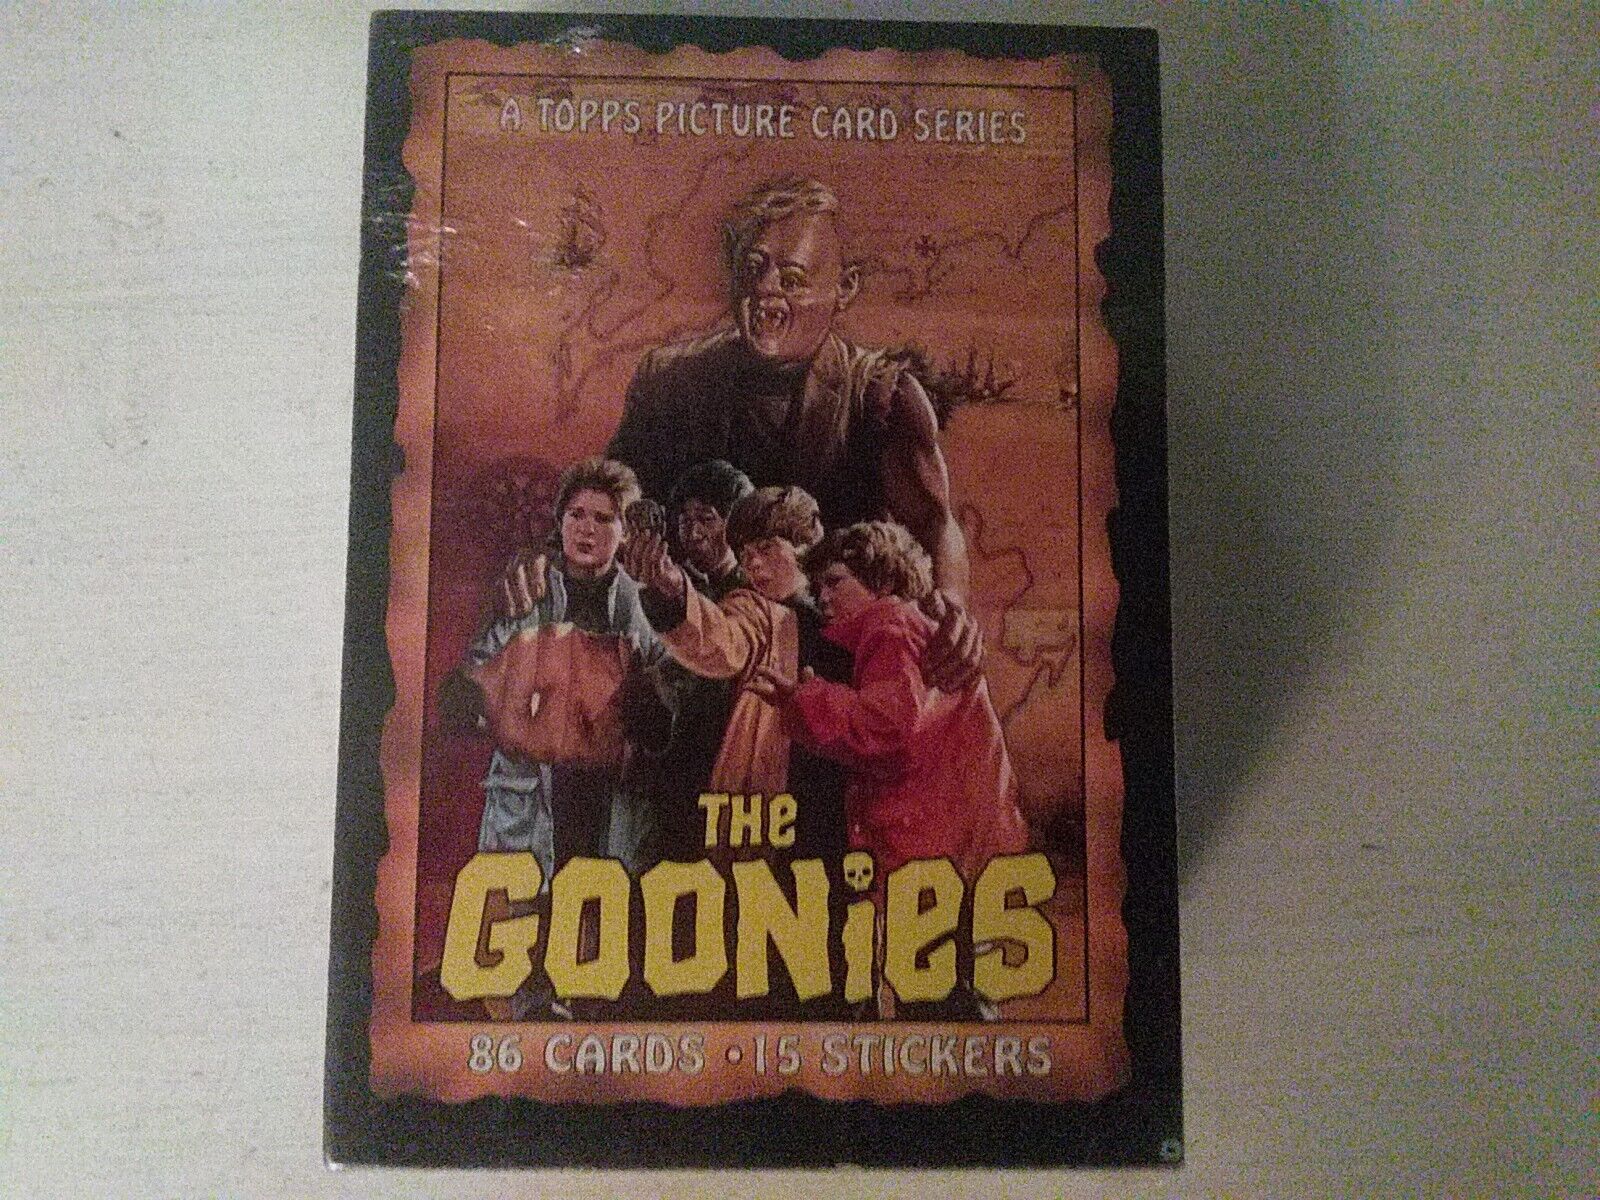 RARE 1985 Topps Goonies Movie Complete 86  Card Set 